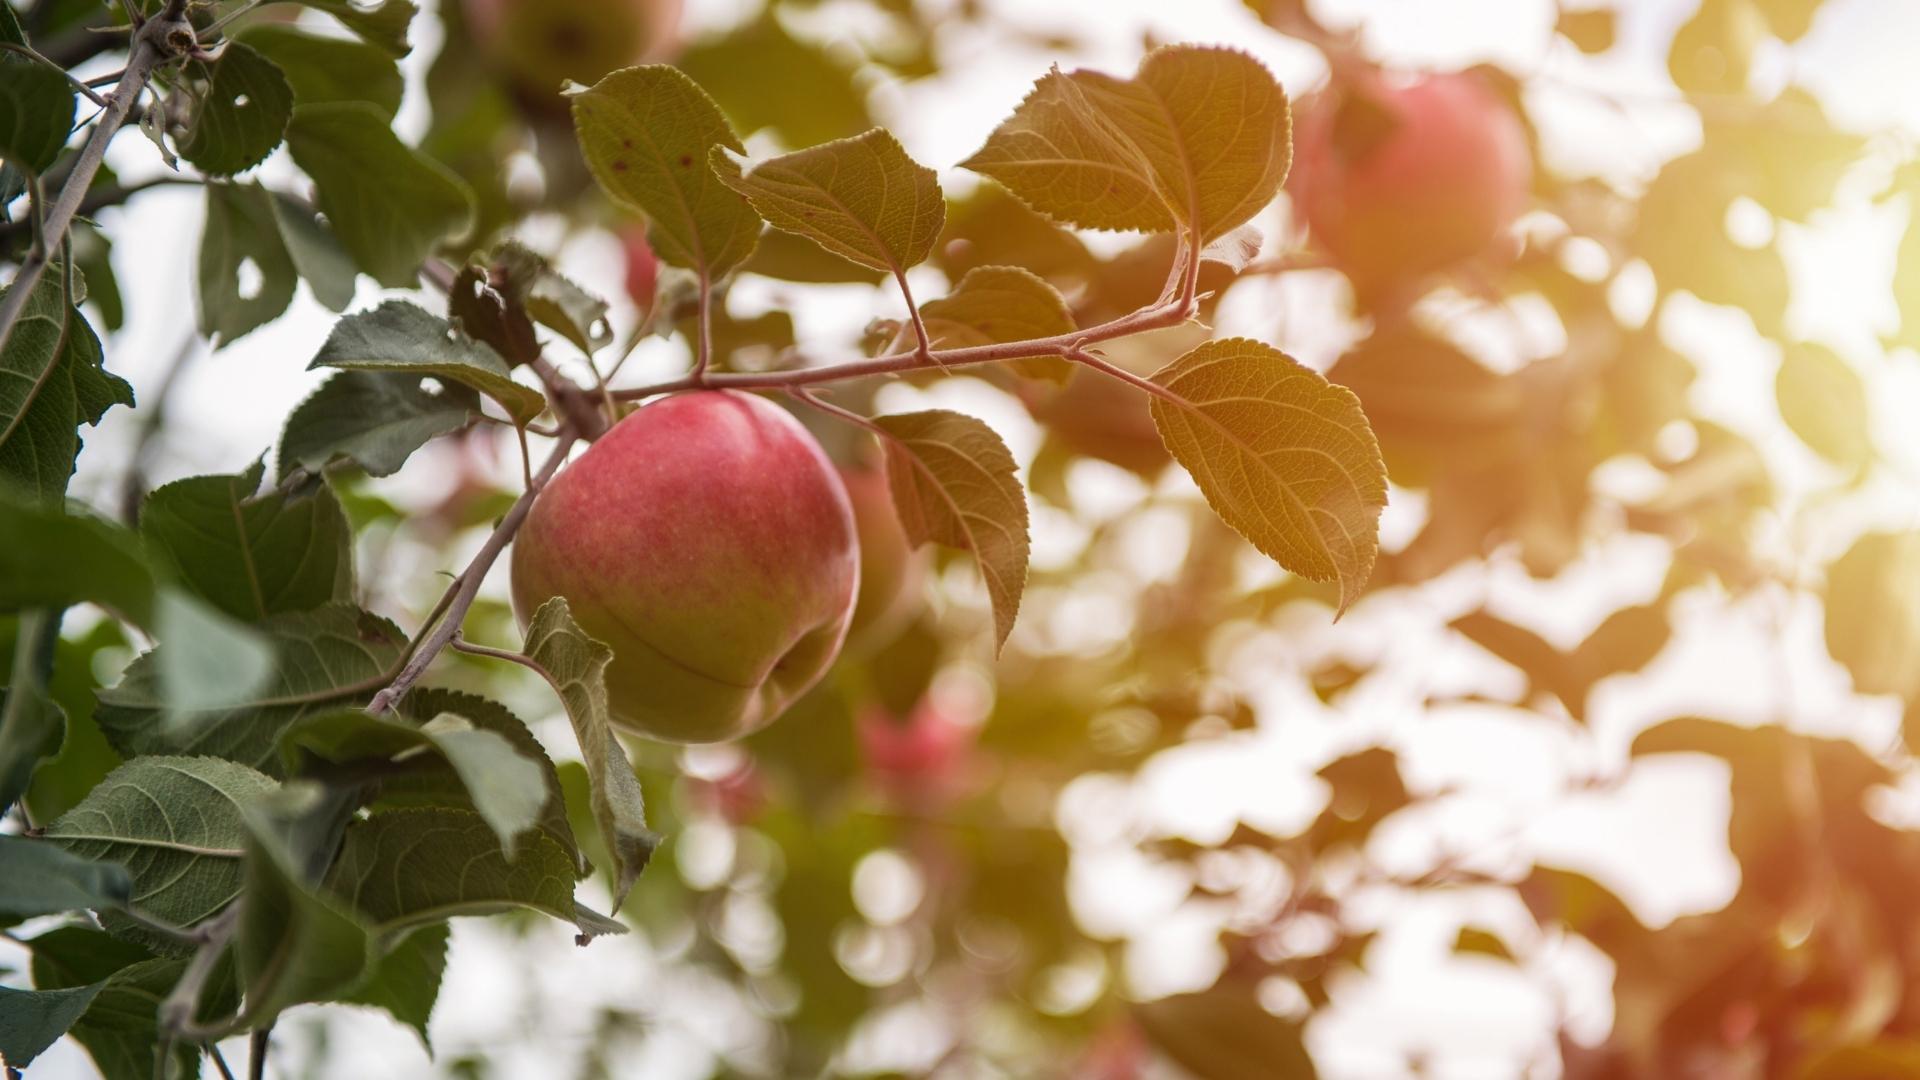 A closeup of an apple tree featuring red apples in sunlight.